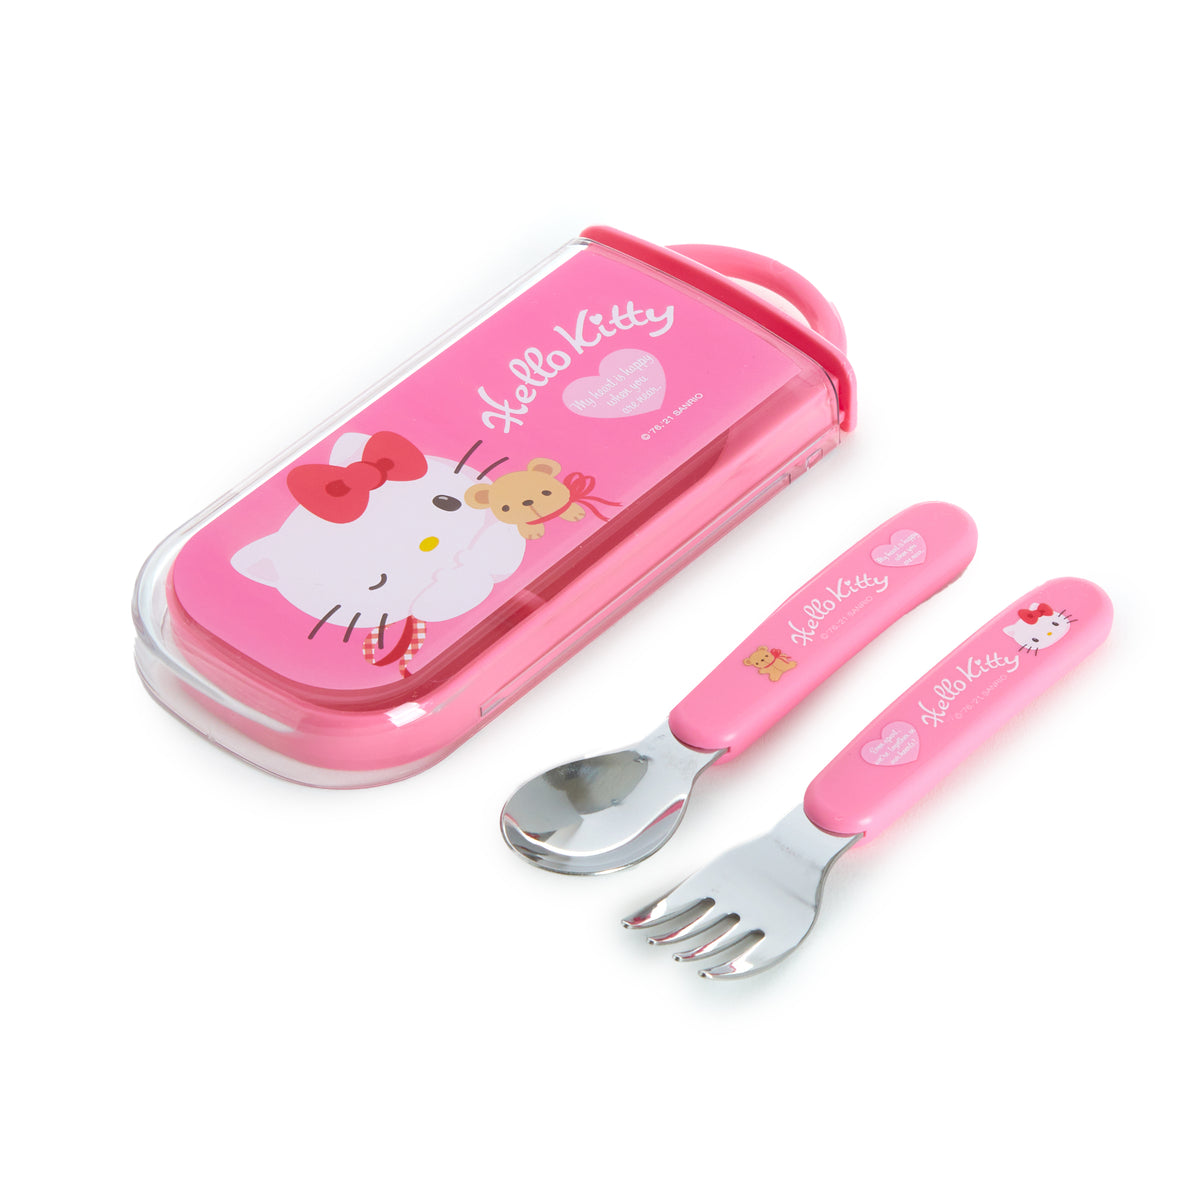 Premium Photo  Lunch box and plastic fork spoon utensils lunchbox